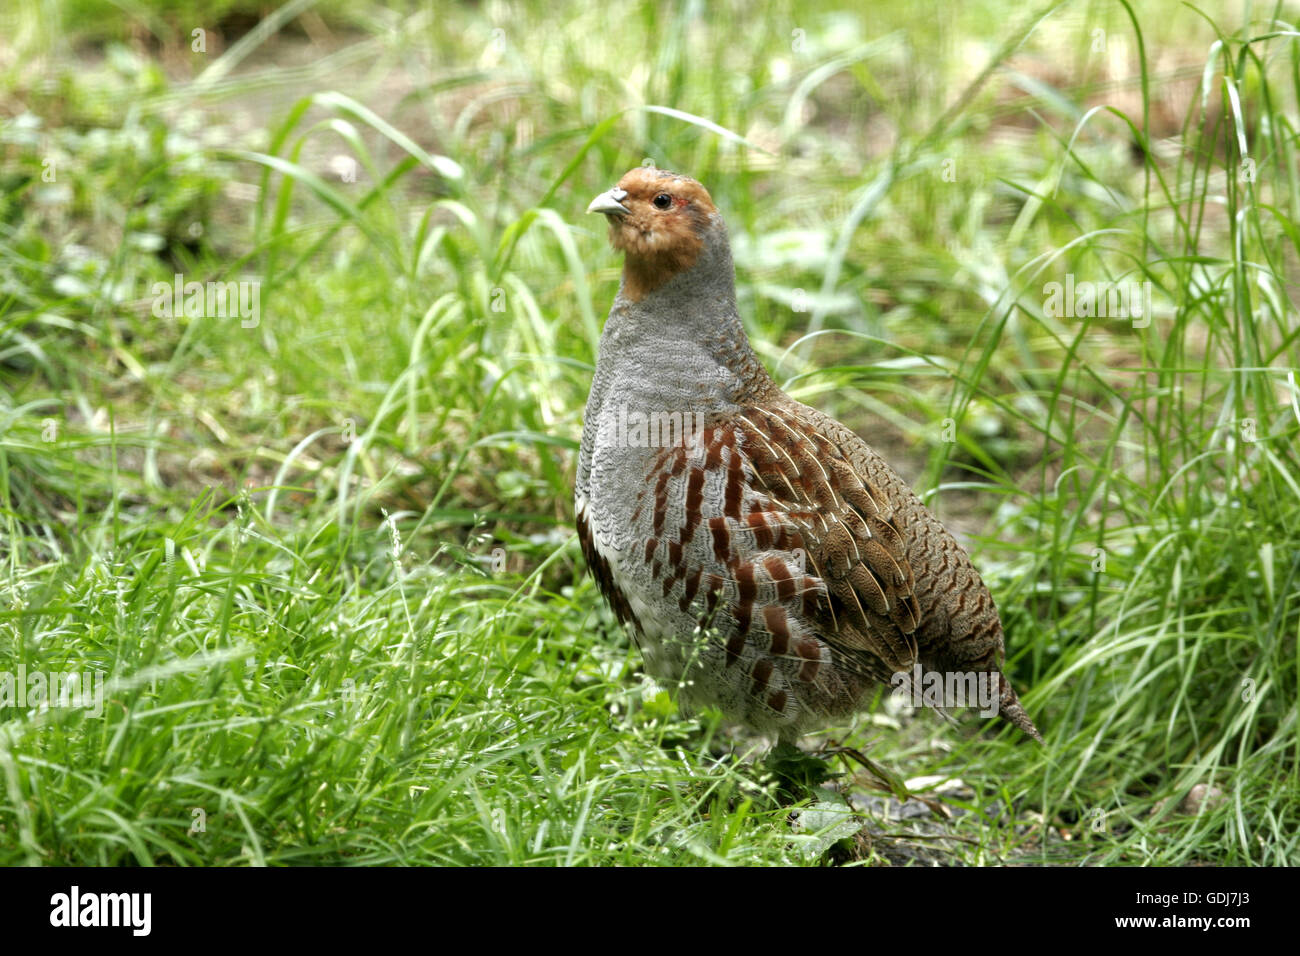 Zoologie/Tiere, Vogel/Vogel, Phasianidae, Rebhuhn (Perdix perdix), stehend in der Wiese, Verbreitung: Europa, Asien, Additional-Rights - Clearance-Info - Not-Available Stockfoto